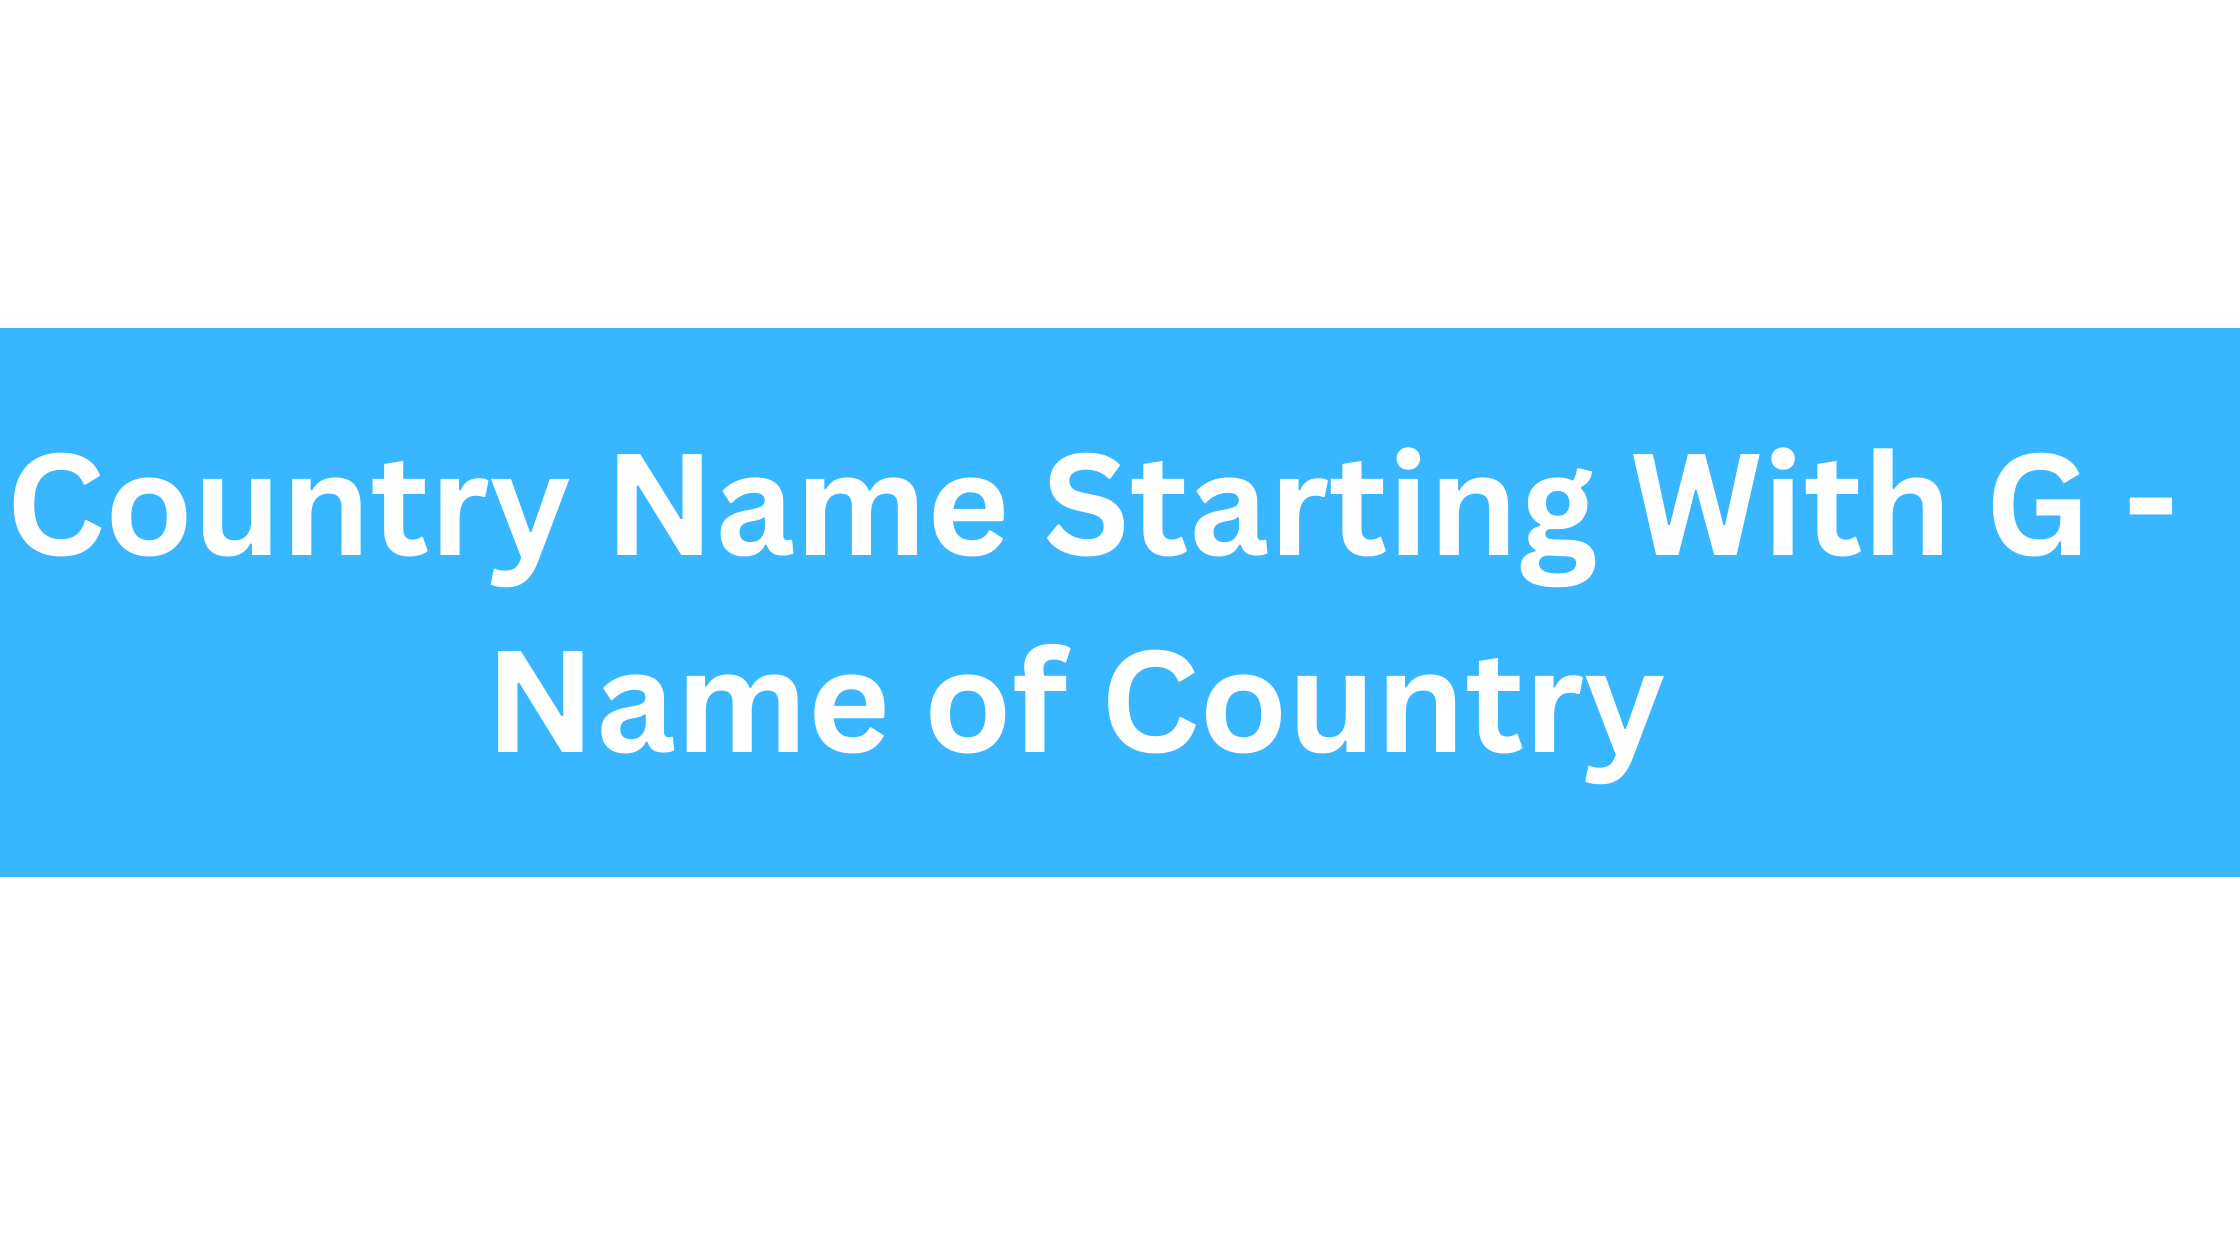 country name starting with G